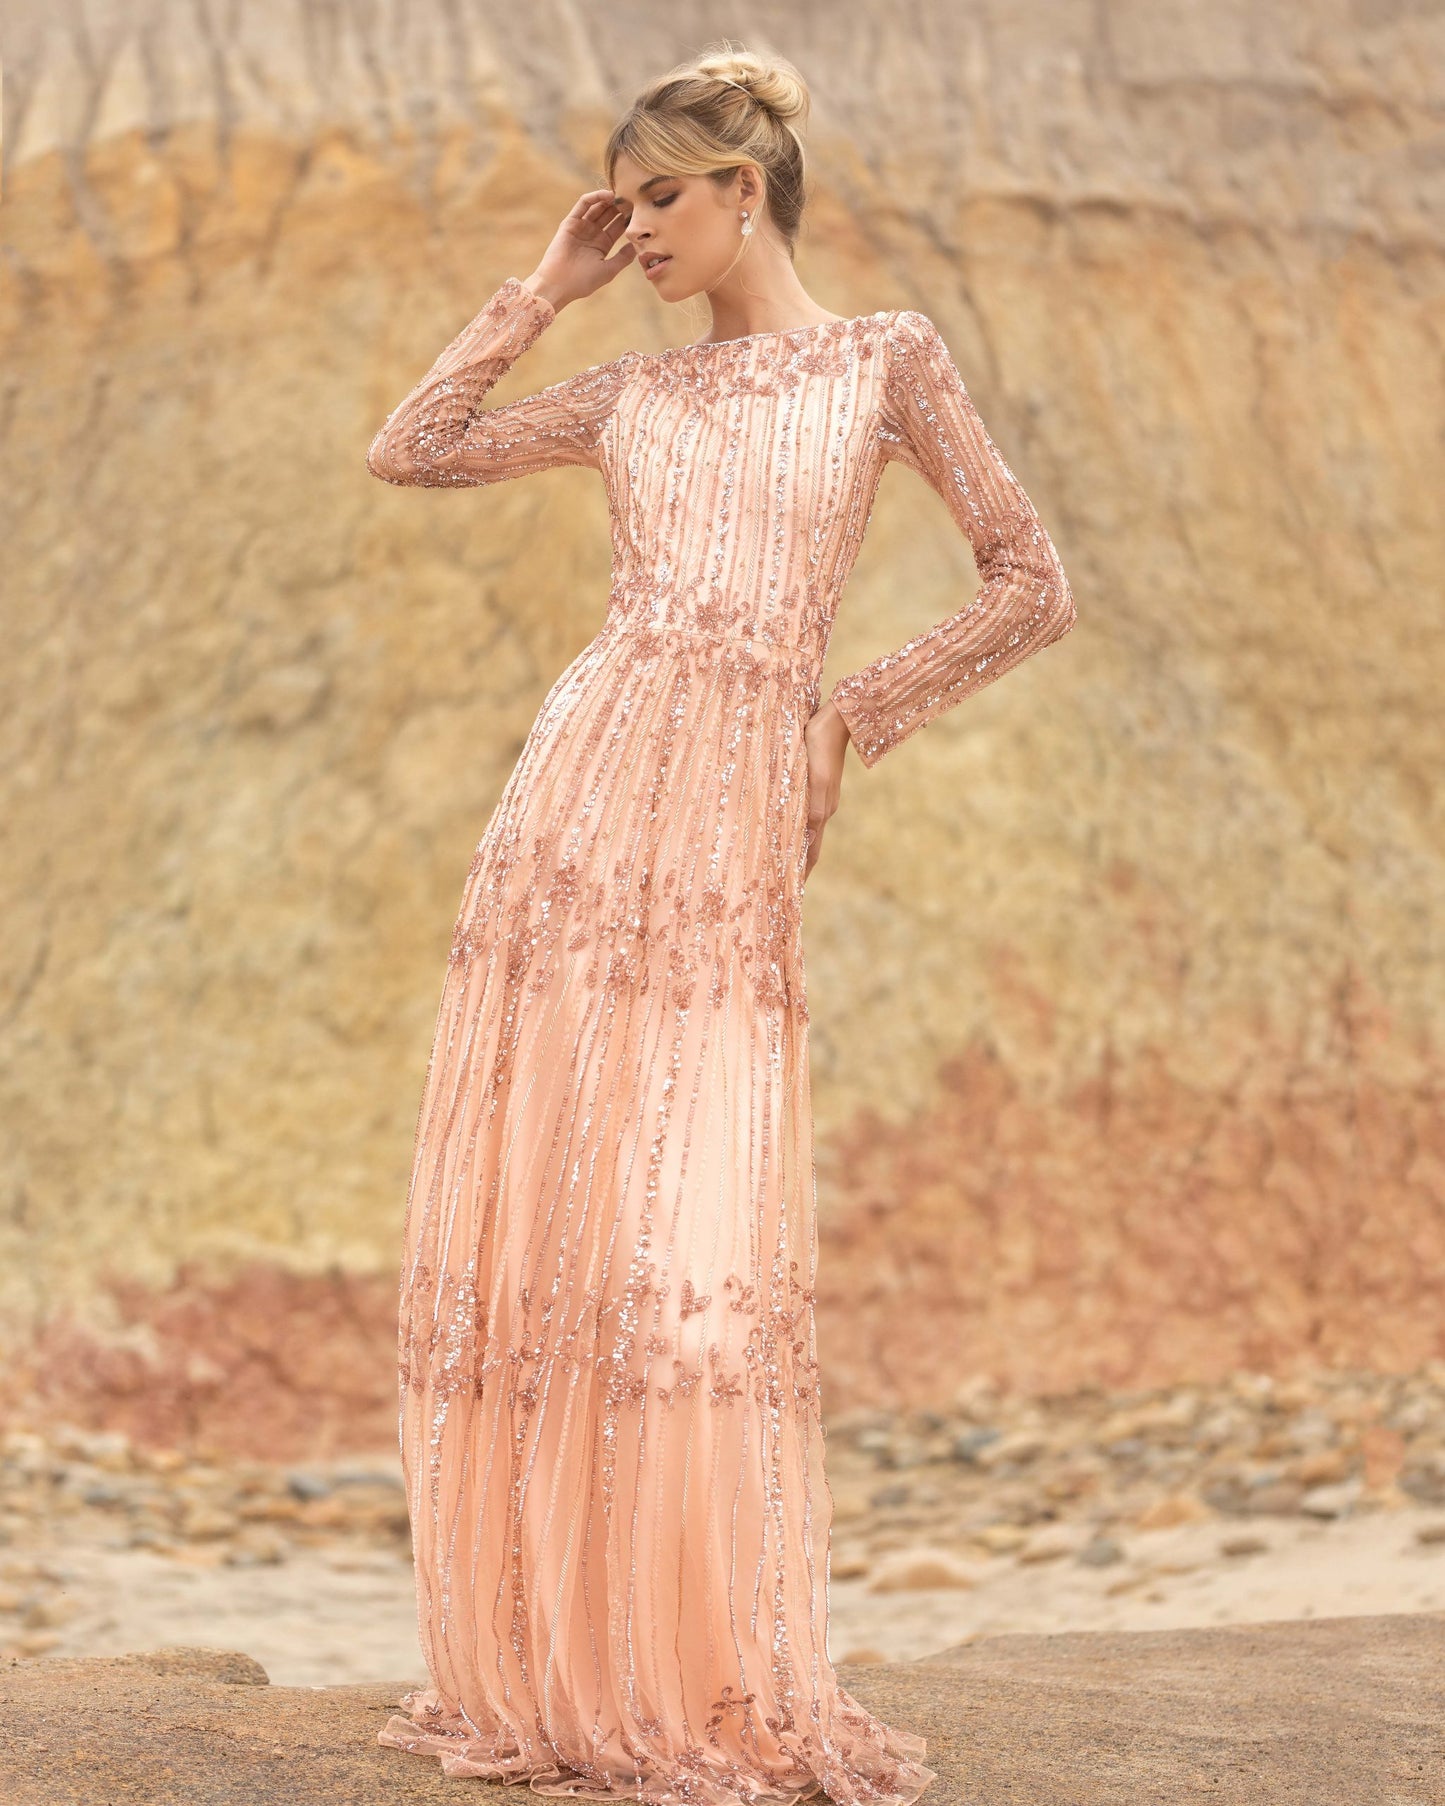 Primavera Couture 3685 This long beaded evening gown has a bateau neckline and long embellished sleeves.  The A line design is beaded to the floor and has a boho tone. Available colors:  Champagne, Black Multi  Available sizes:  0-24